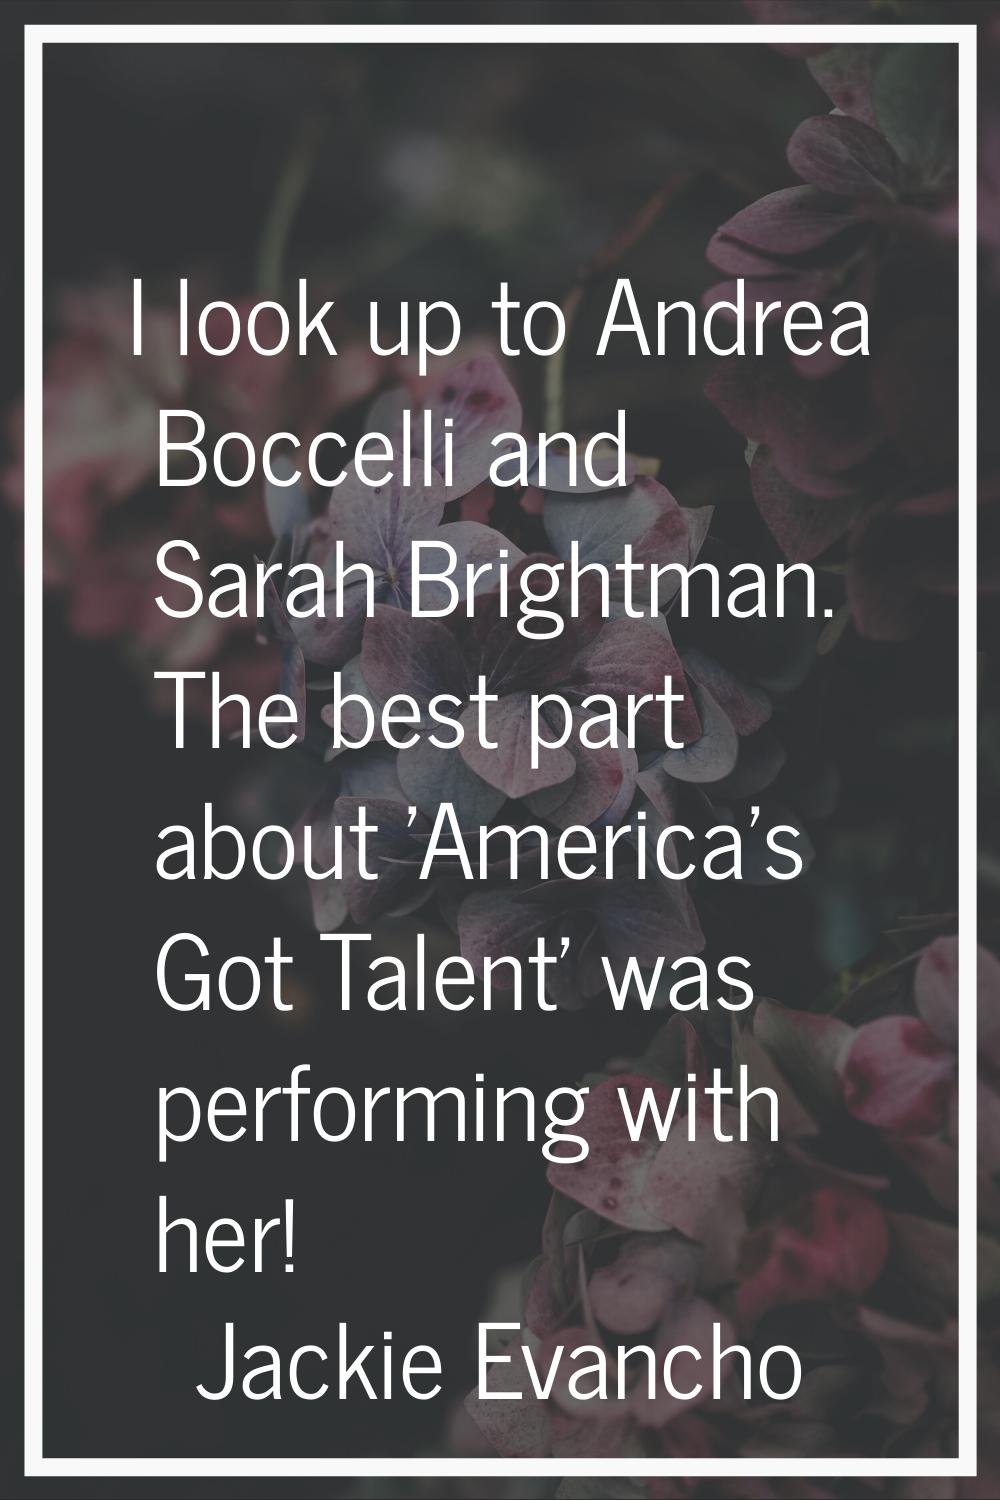 I look up to Andrea Boccelli and Sarah Brightman. The best part about 'America's Got Talent' was pe